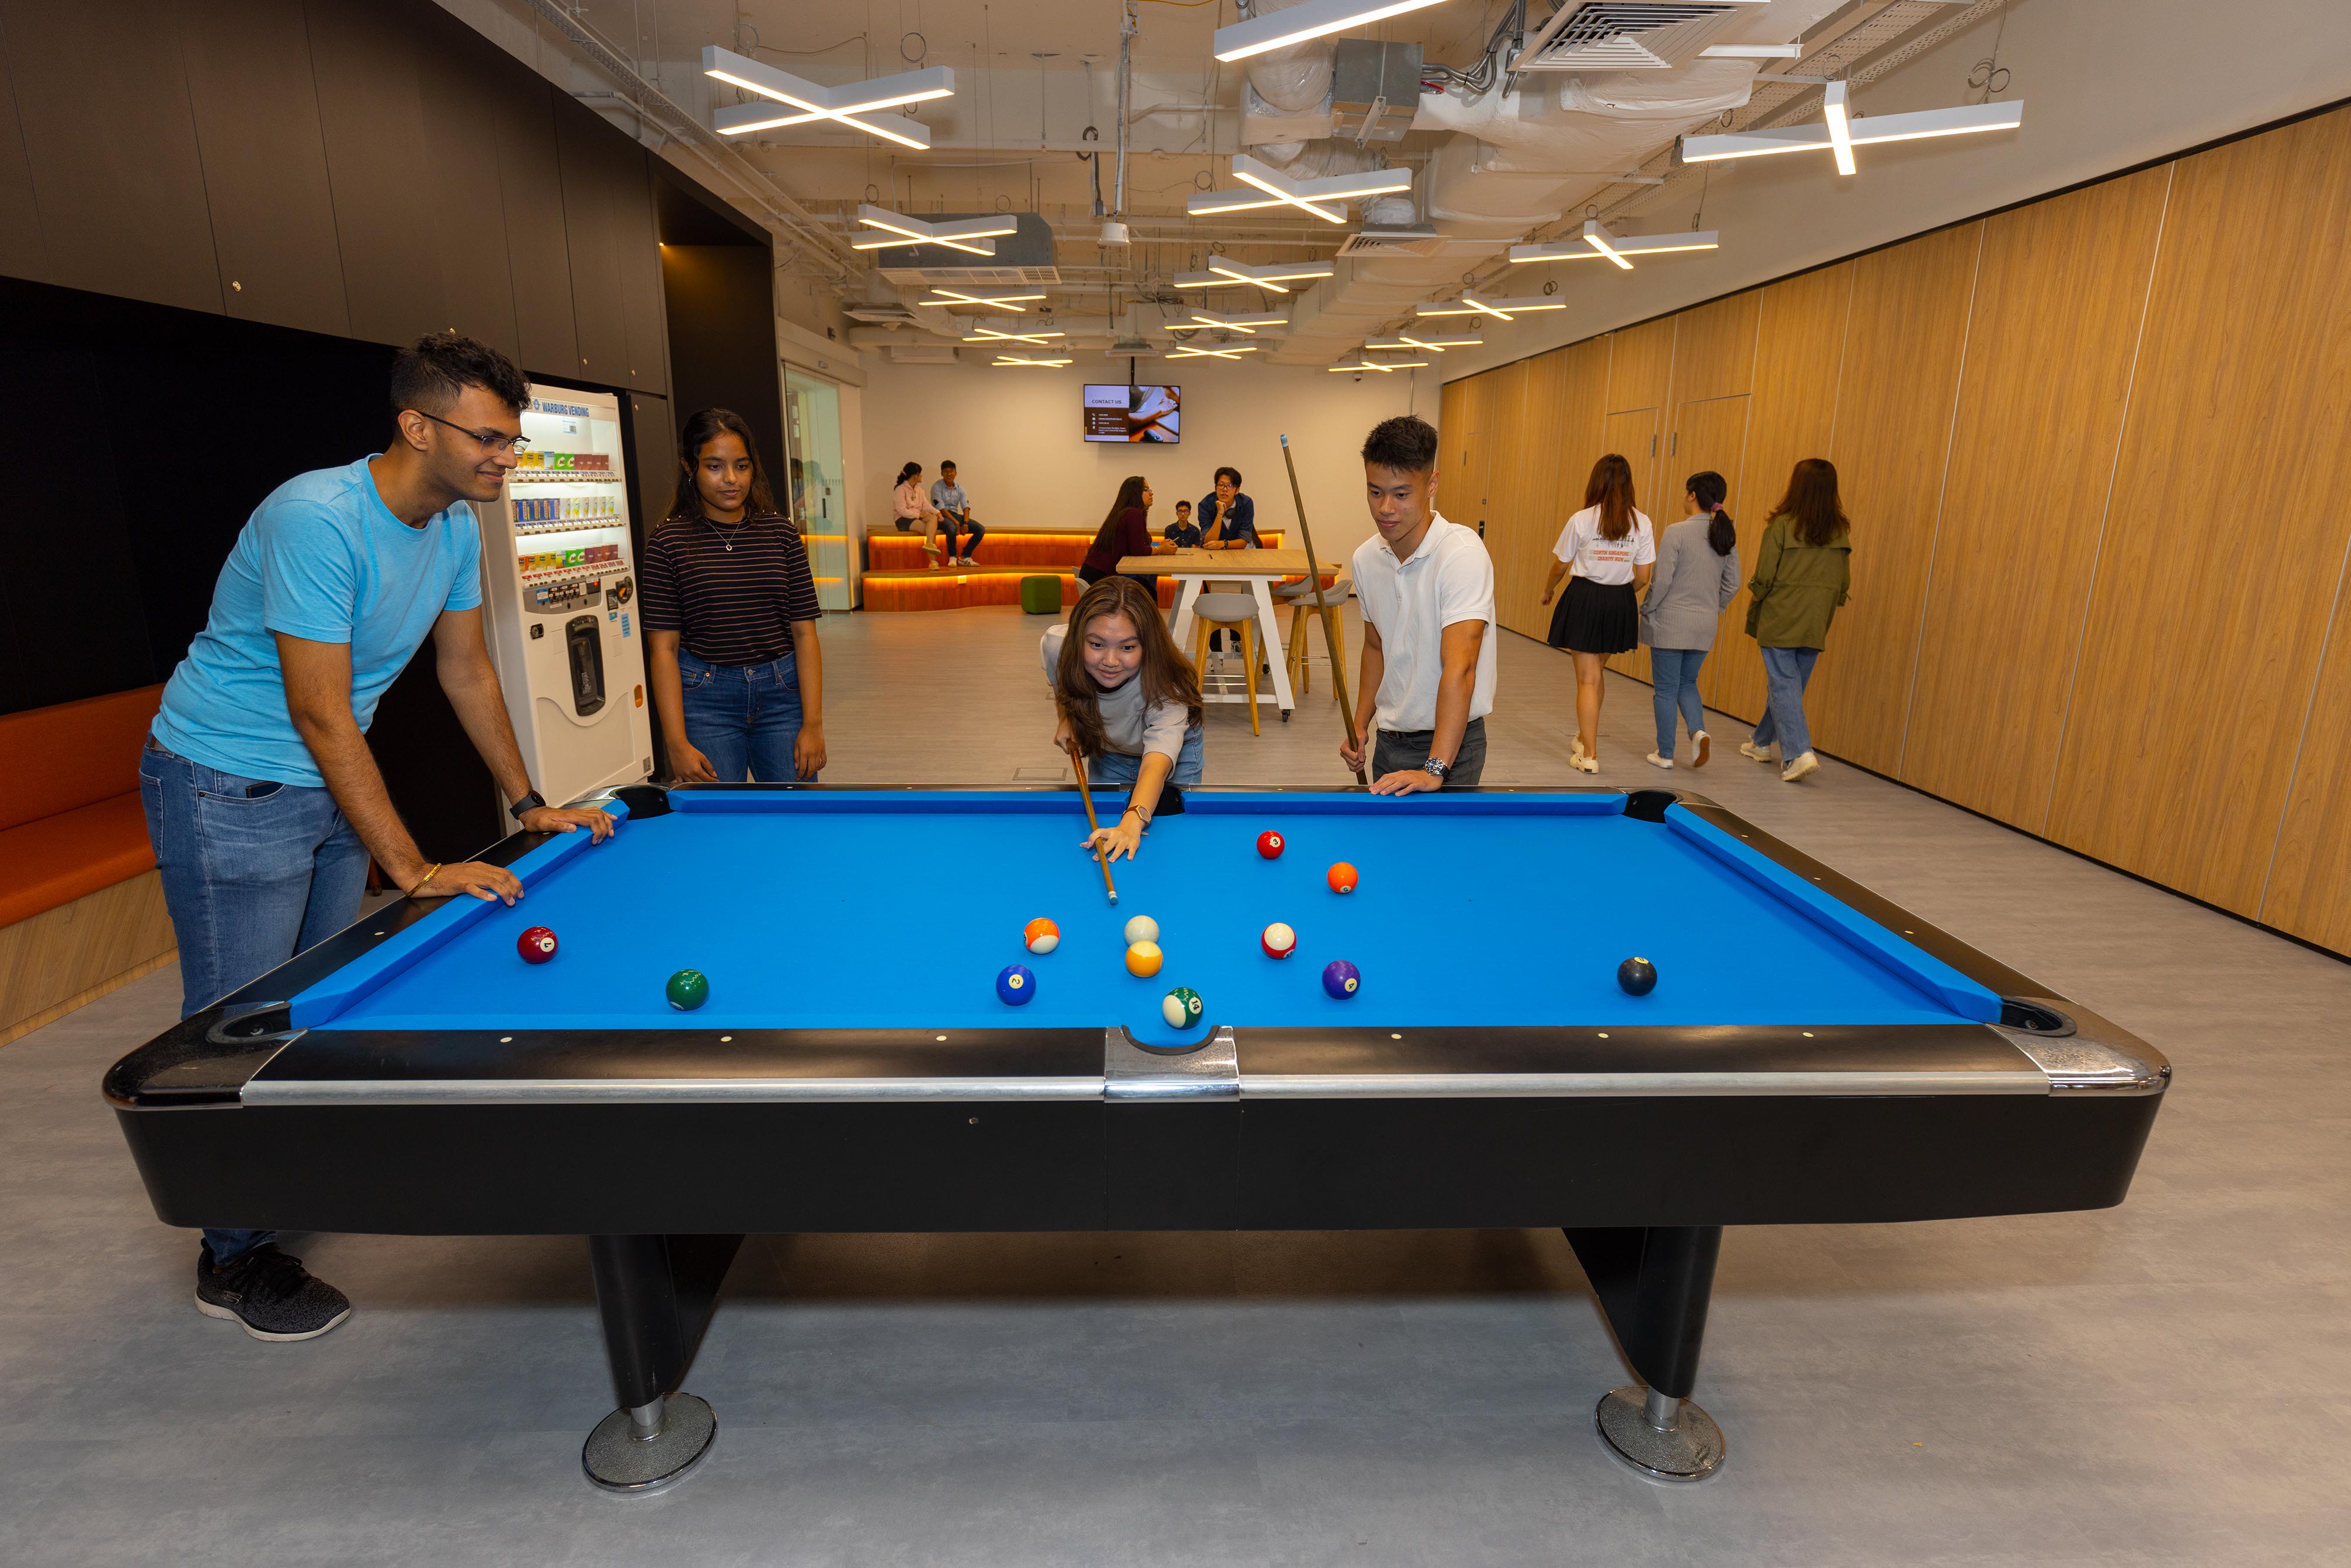 Curtin Singapore’s new Student Unihub is set to be the go-to spot for students to destress after a long day of classes. Image courtesy of Curtin Singapore.